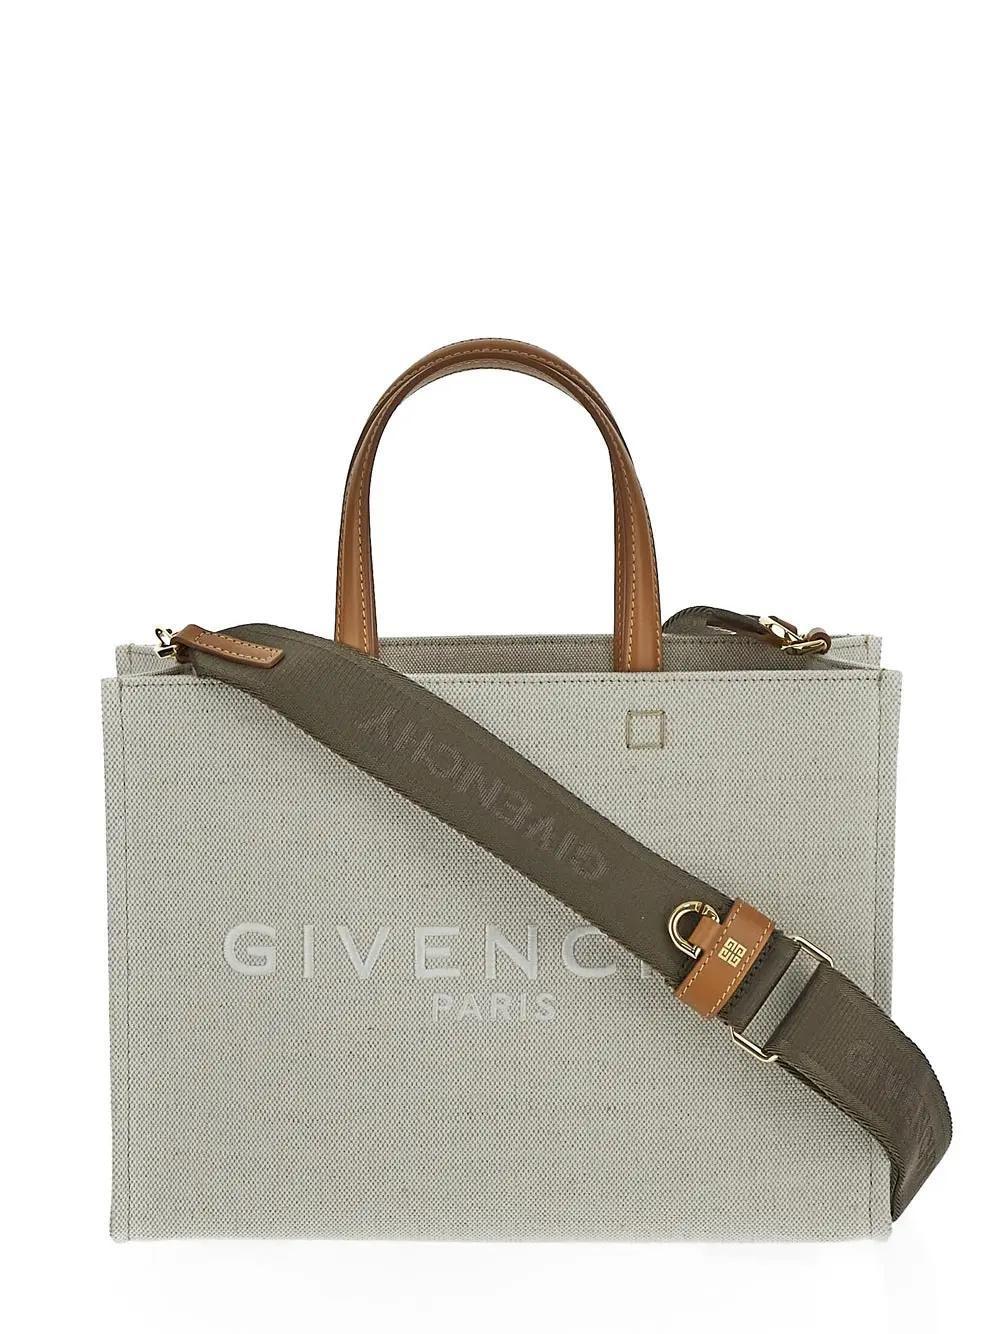 Givenchy Small G Tote Shopping Bag in Metallic | Lyst